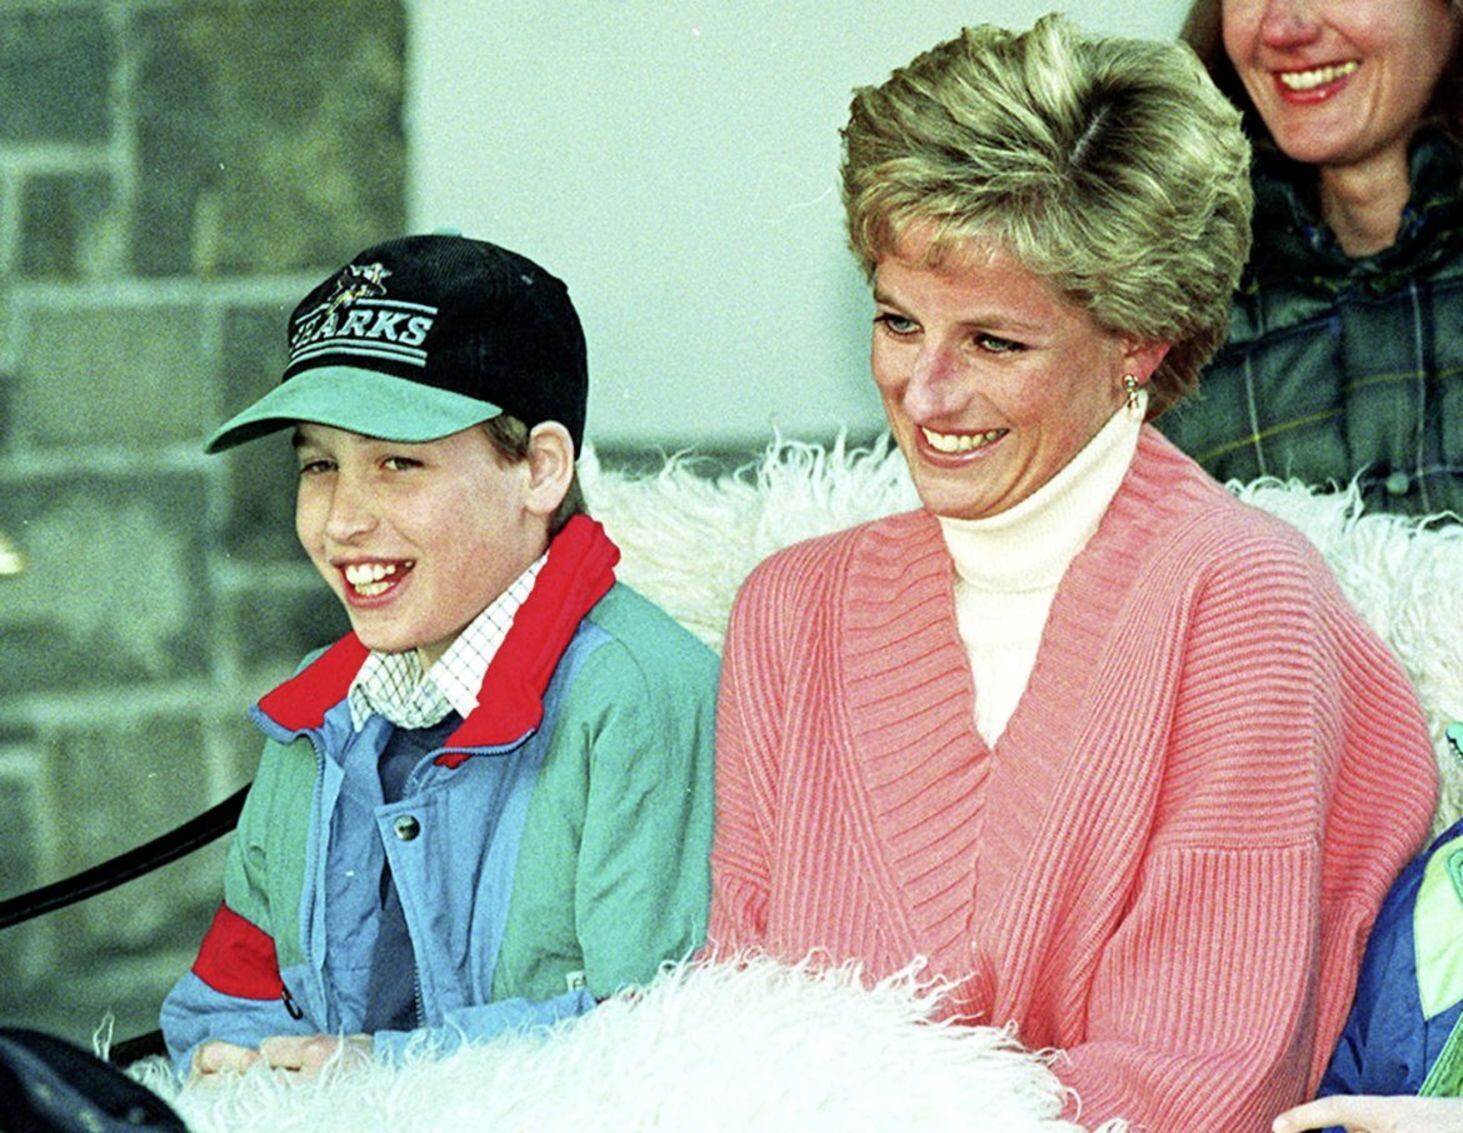 Bryan Adams: Meeting Diana was one of the greatest things to